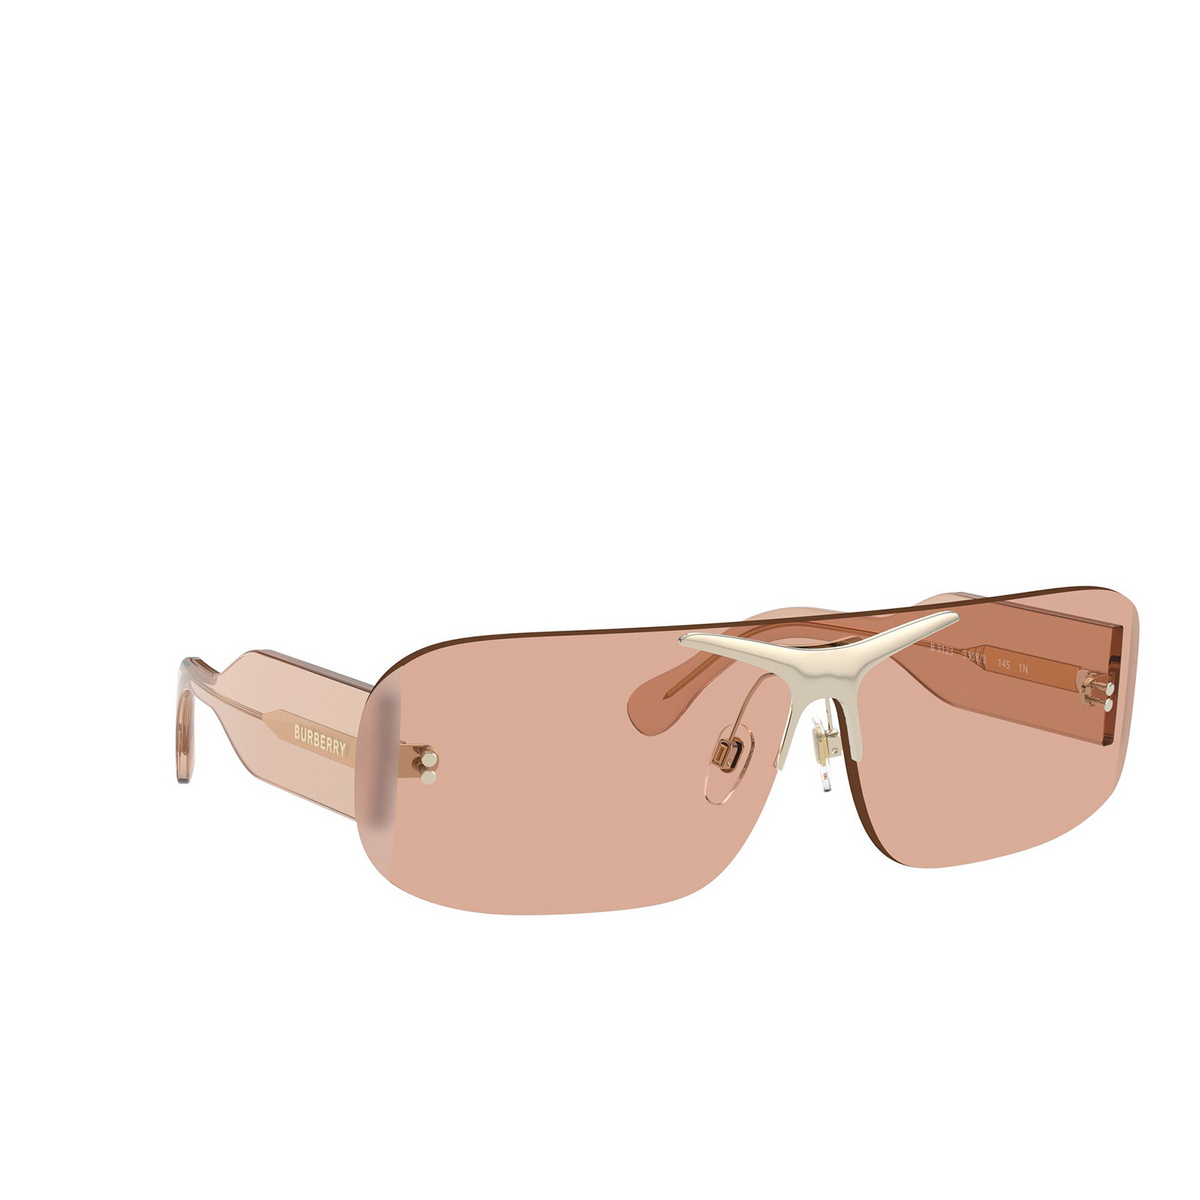 Burberry® Rectangle Sunglasses: BE3123 color Brown 3358/3 - three-quarters view.